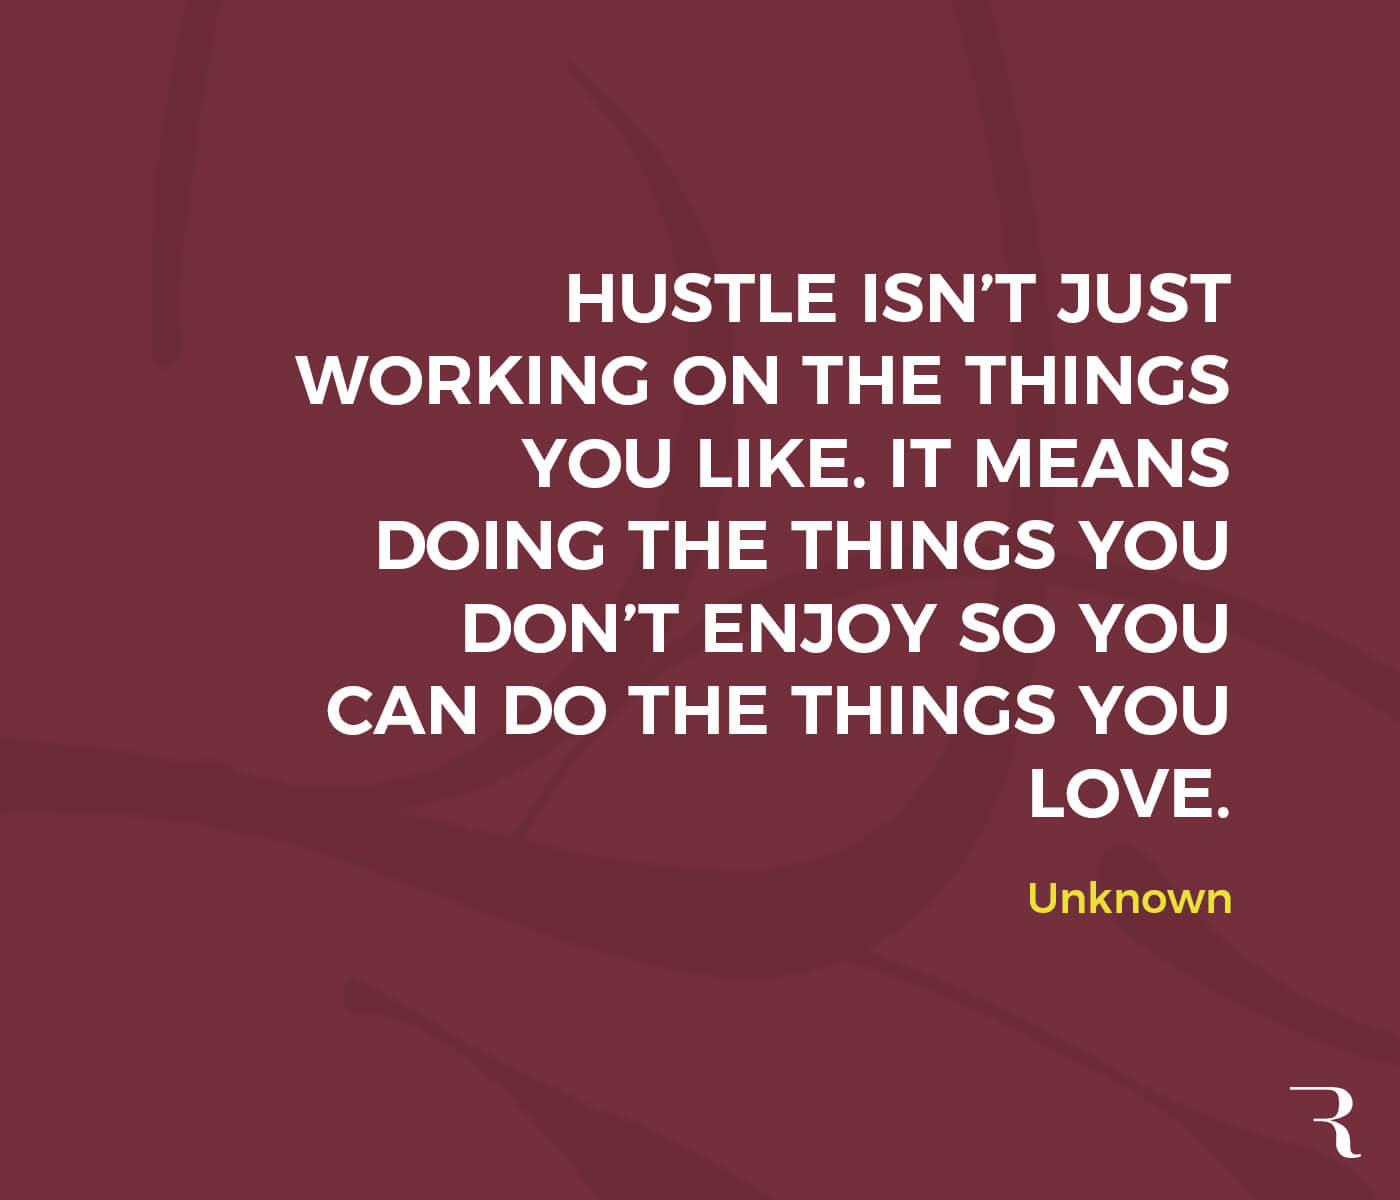 Motivational Quotes: “Hustle isn’t doing what you like, it's doing the things you don’t—so you can do what you love.” 112 Motivational Quotes to Be a Better Entrepreneur